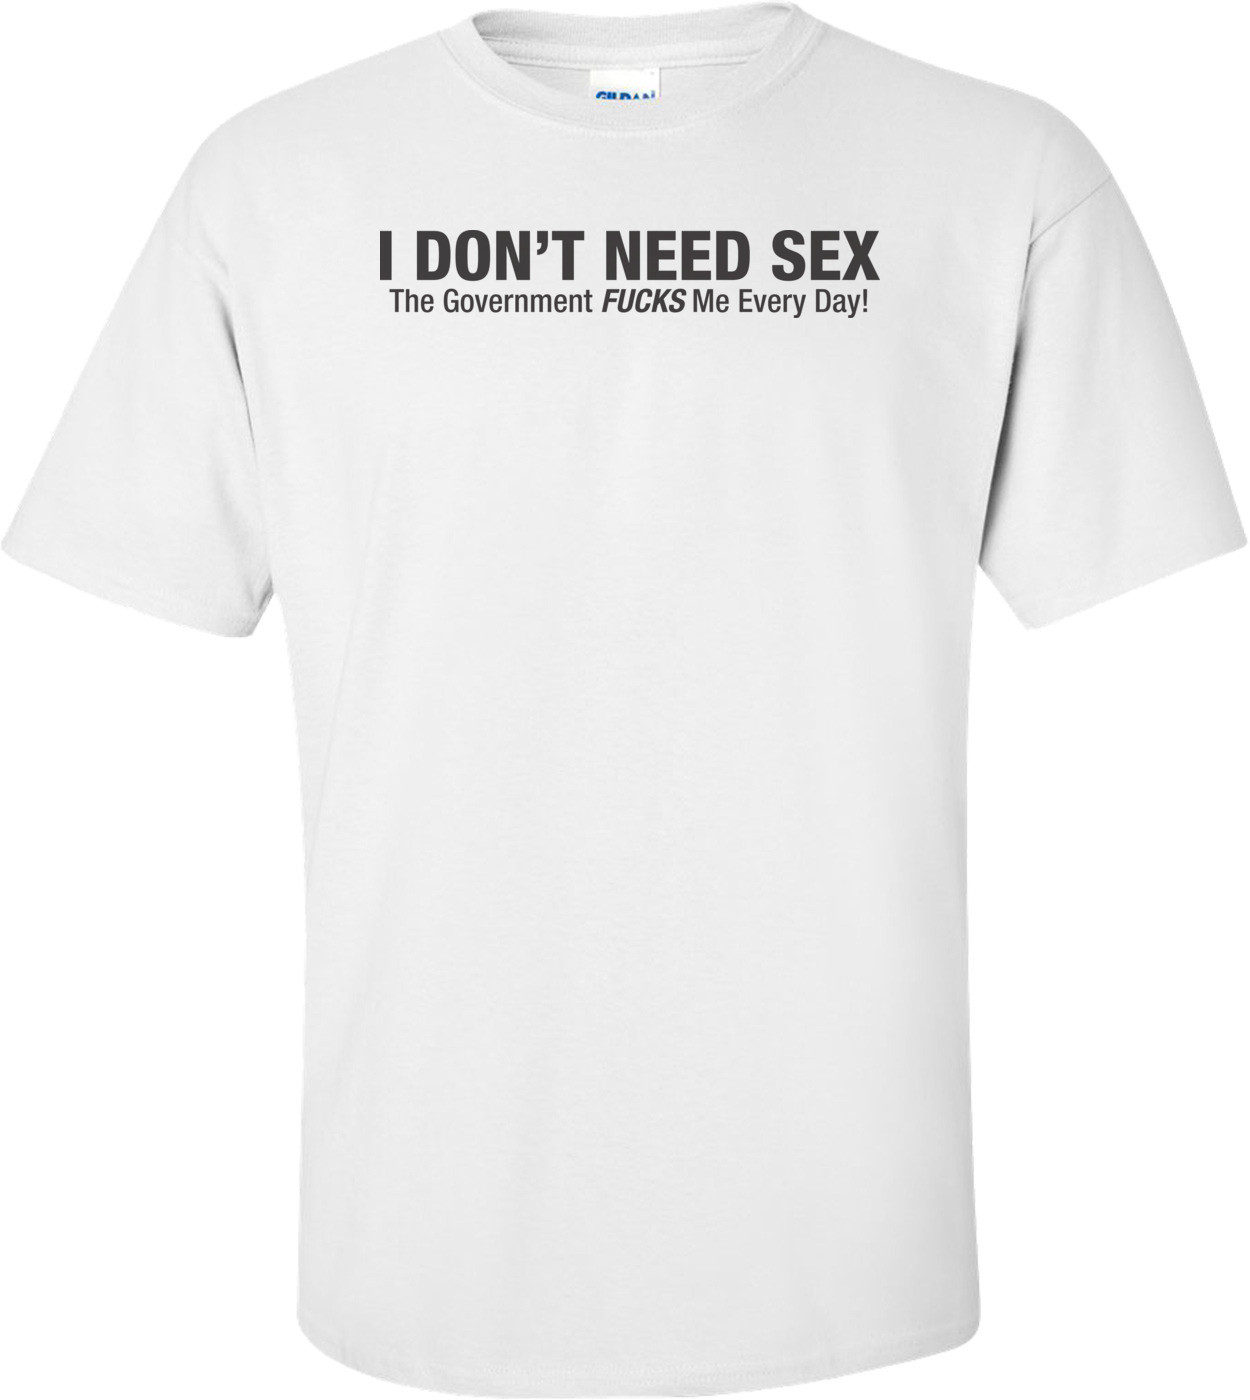 I Don't Need Sex The Government Fucks Me Everyday! T-shirt 